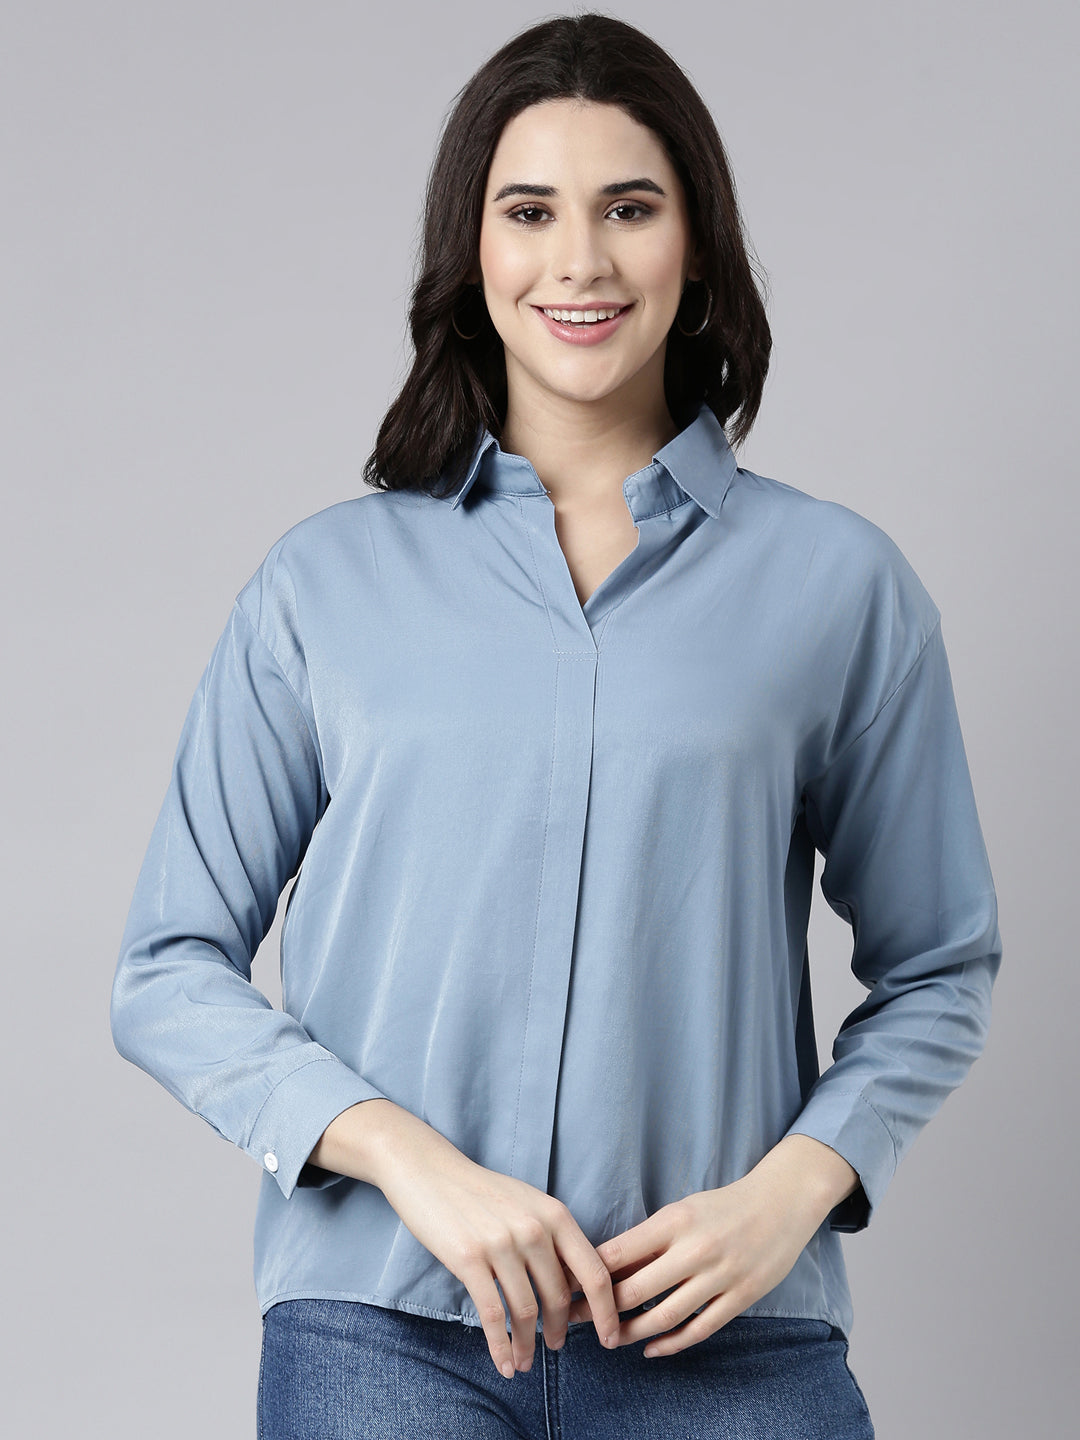 Women Solid Blue Shirt Style Top